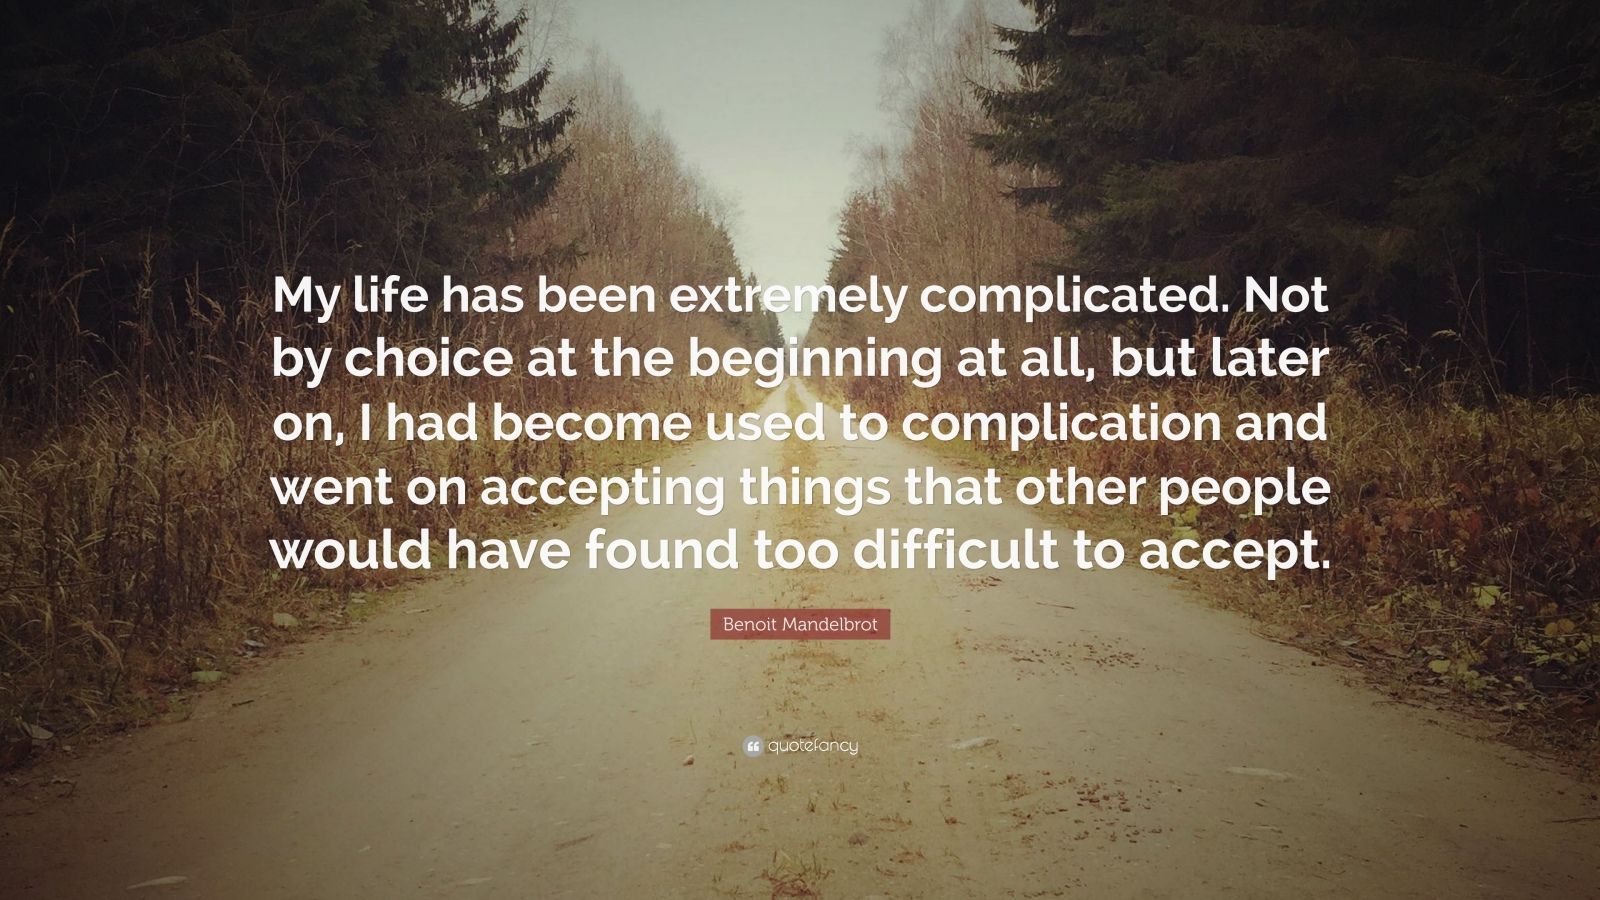 Benoit Mandelbrot Quote “My life has been extremely complicated. Not